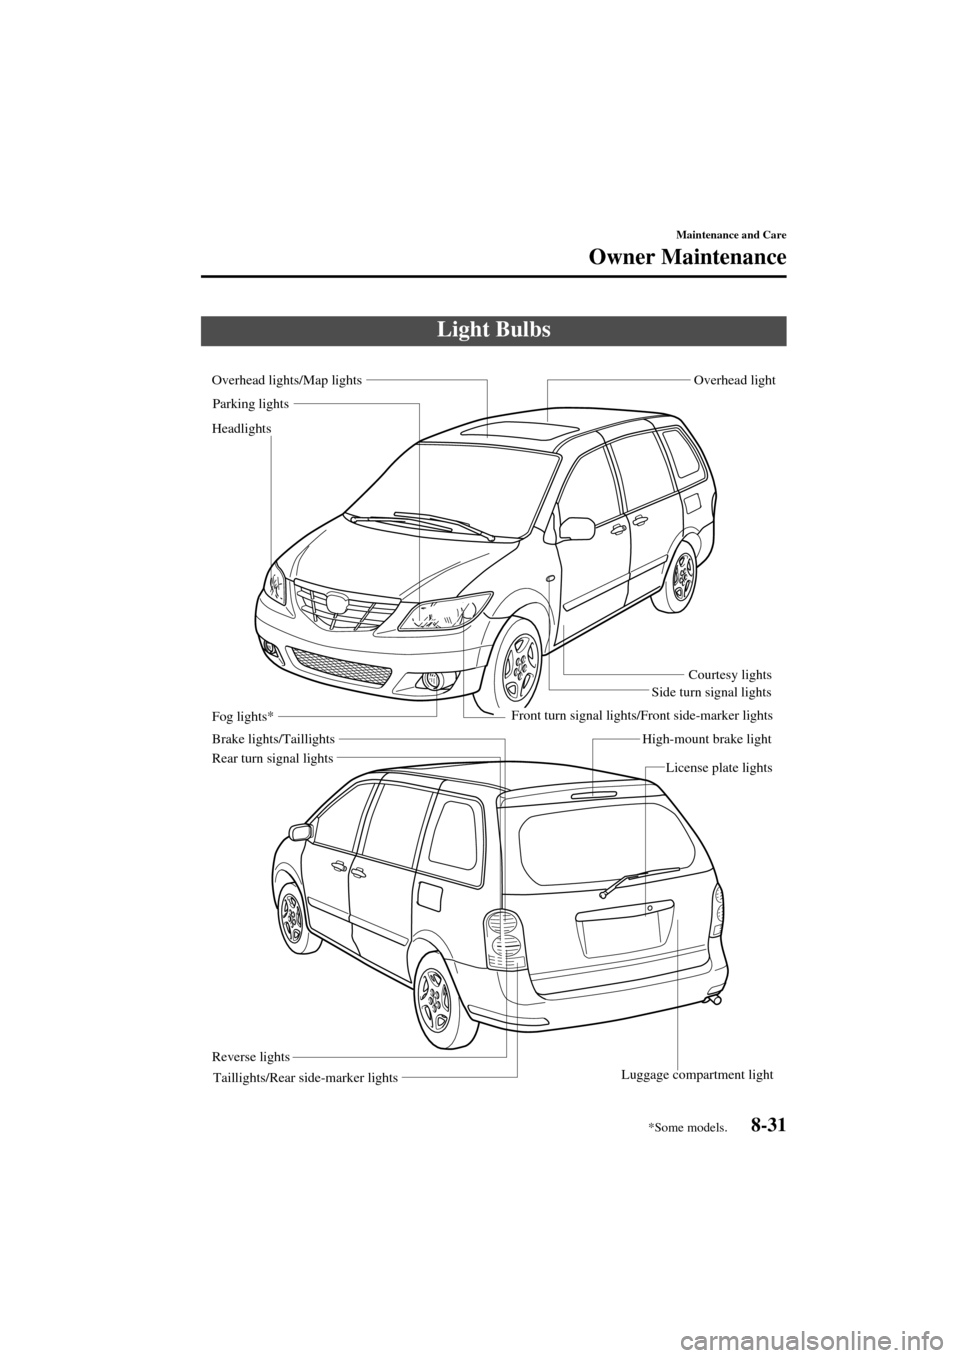 MAZDA MODEL MPV 2004  Owners Manual (in English) 8-31
Maintenance and Care
Owner Maintenance
Form No. 8S06-EA-03H
Light Bulbs
Rear turn signal lights
Reverse lights
Taillights/Rear side-marker lightsLicense plate lights
Luggage compartment lightOver